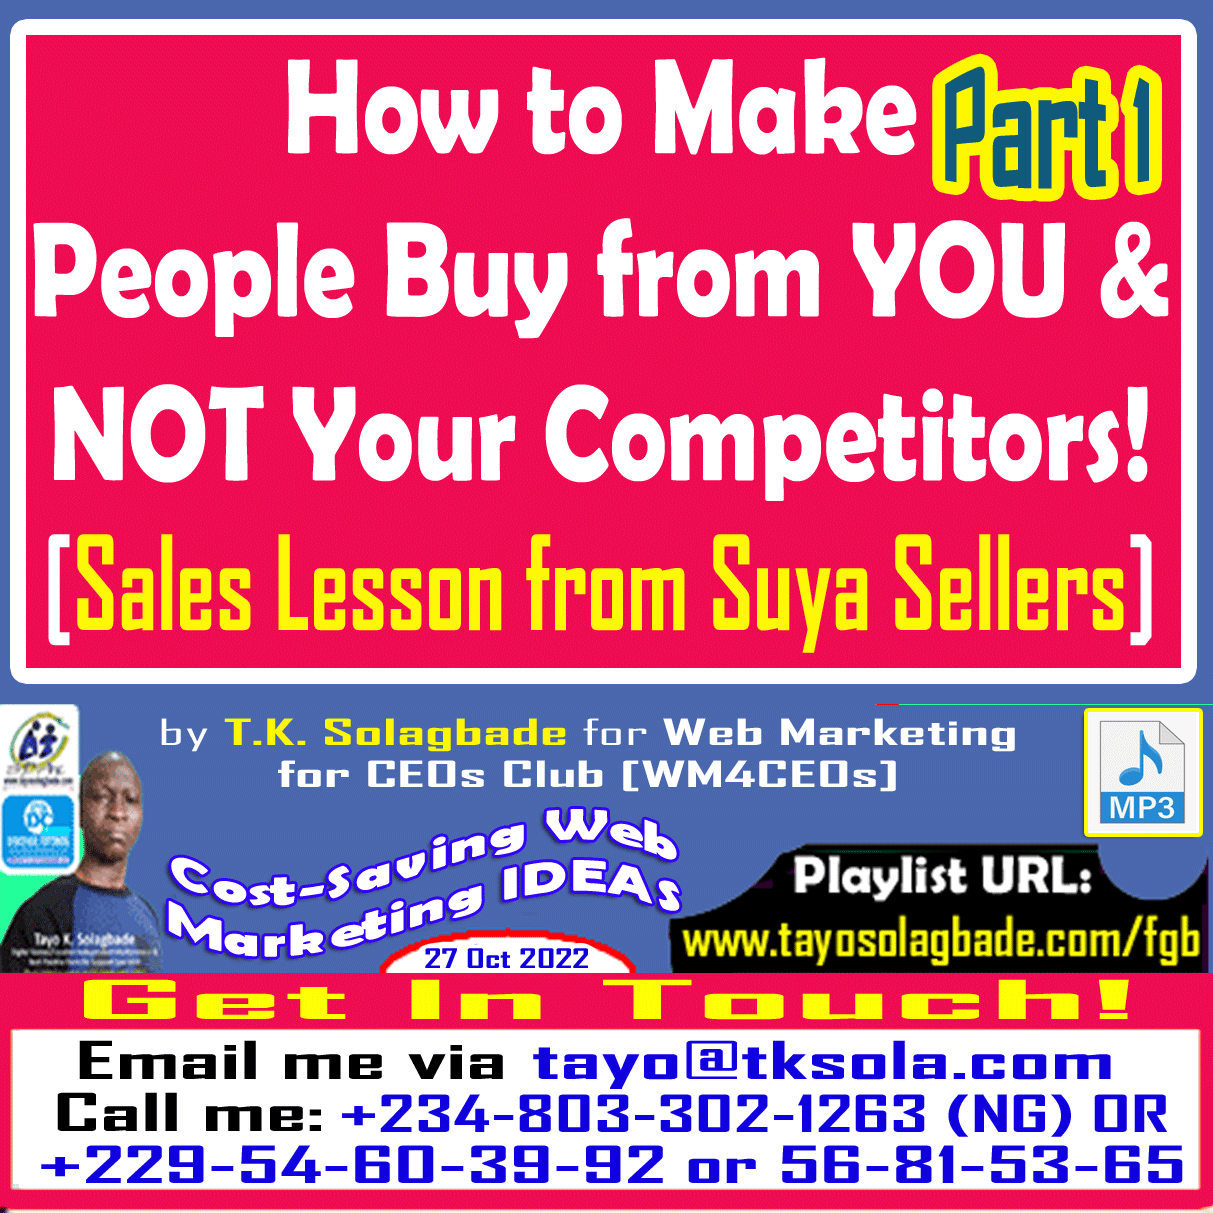 How to Make People Buy from YOU & NOT Your Competitors [Part 1: Sales Lesson from Suya Sellers]